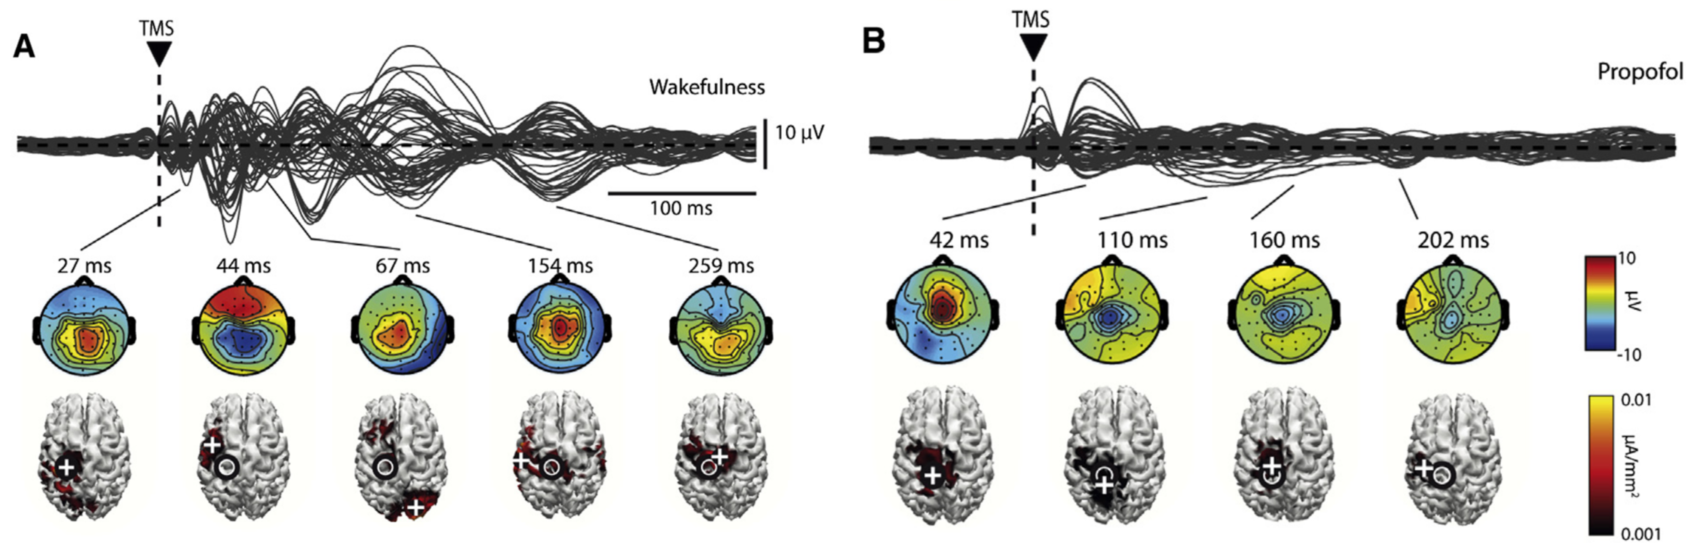 Spatiotemporal Dynamics Induced by Propofol during TMS-EEG